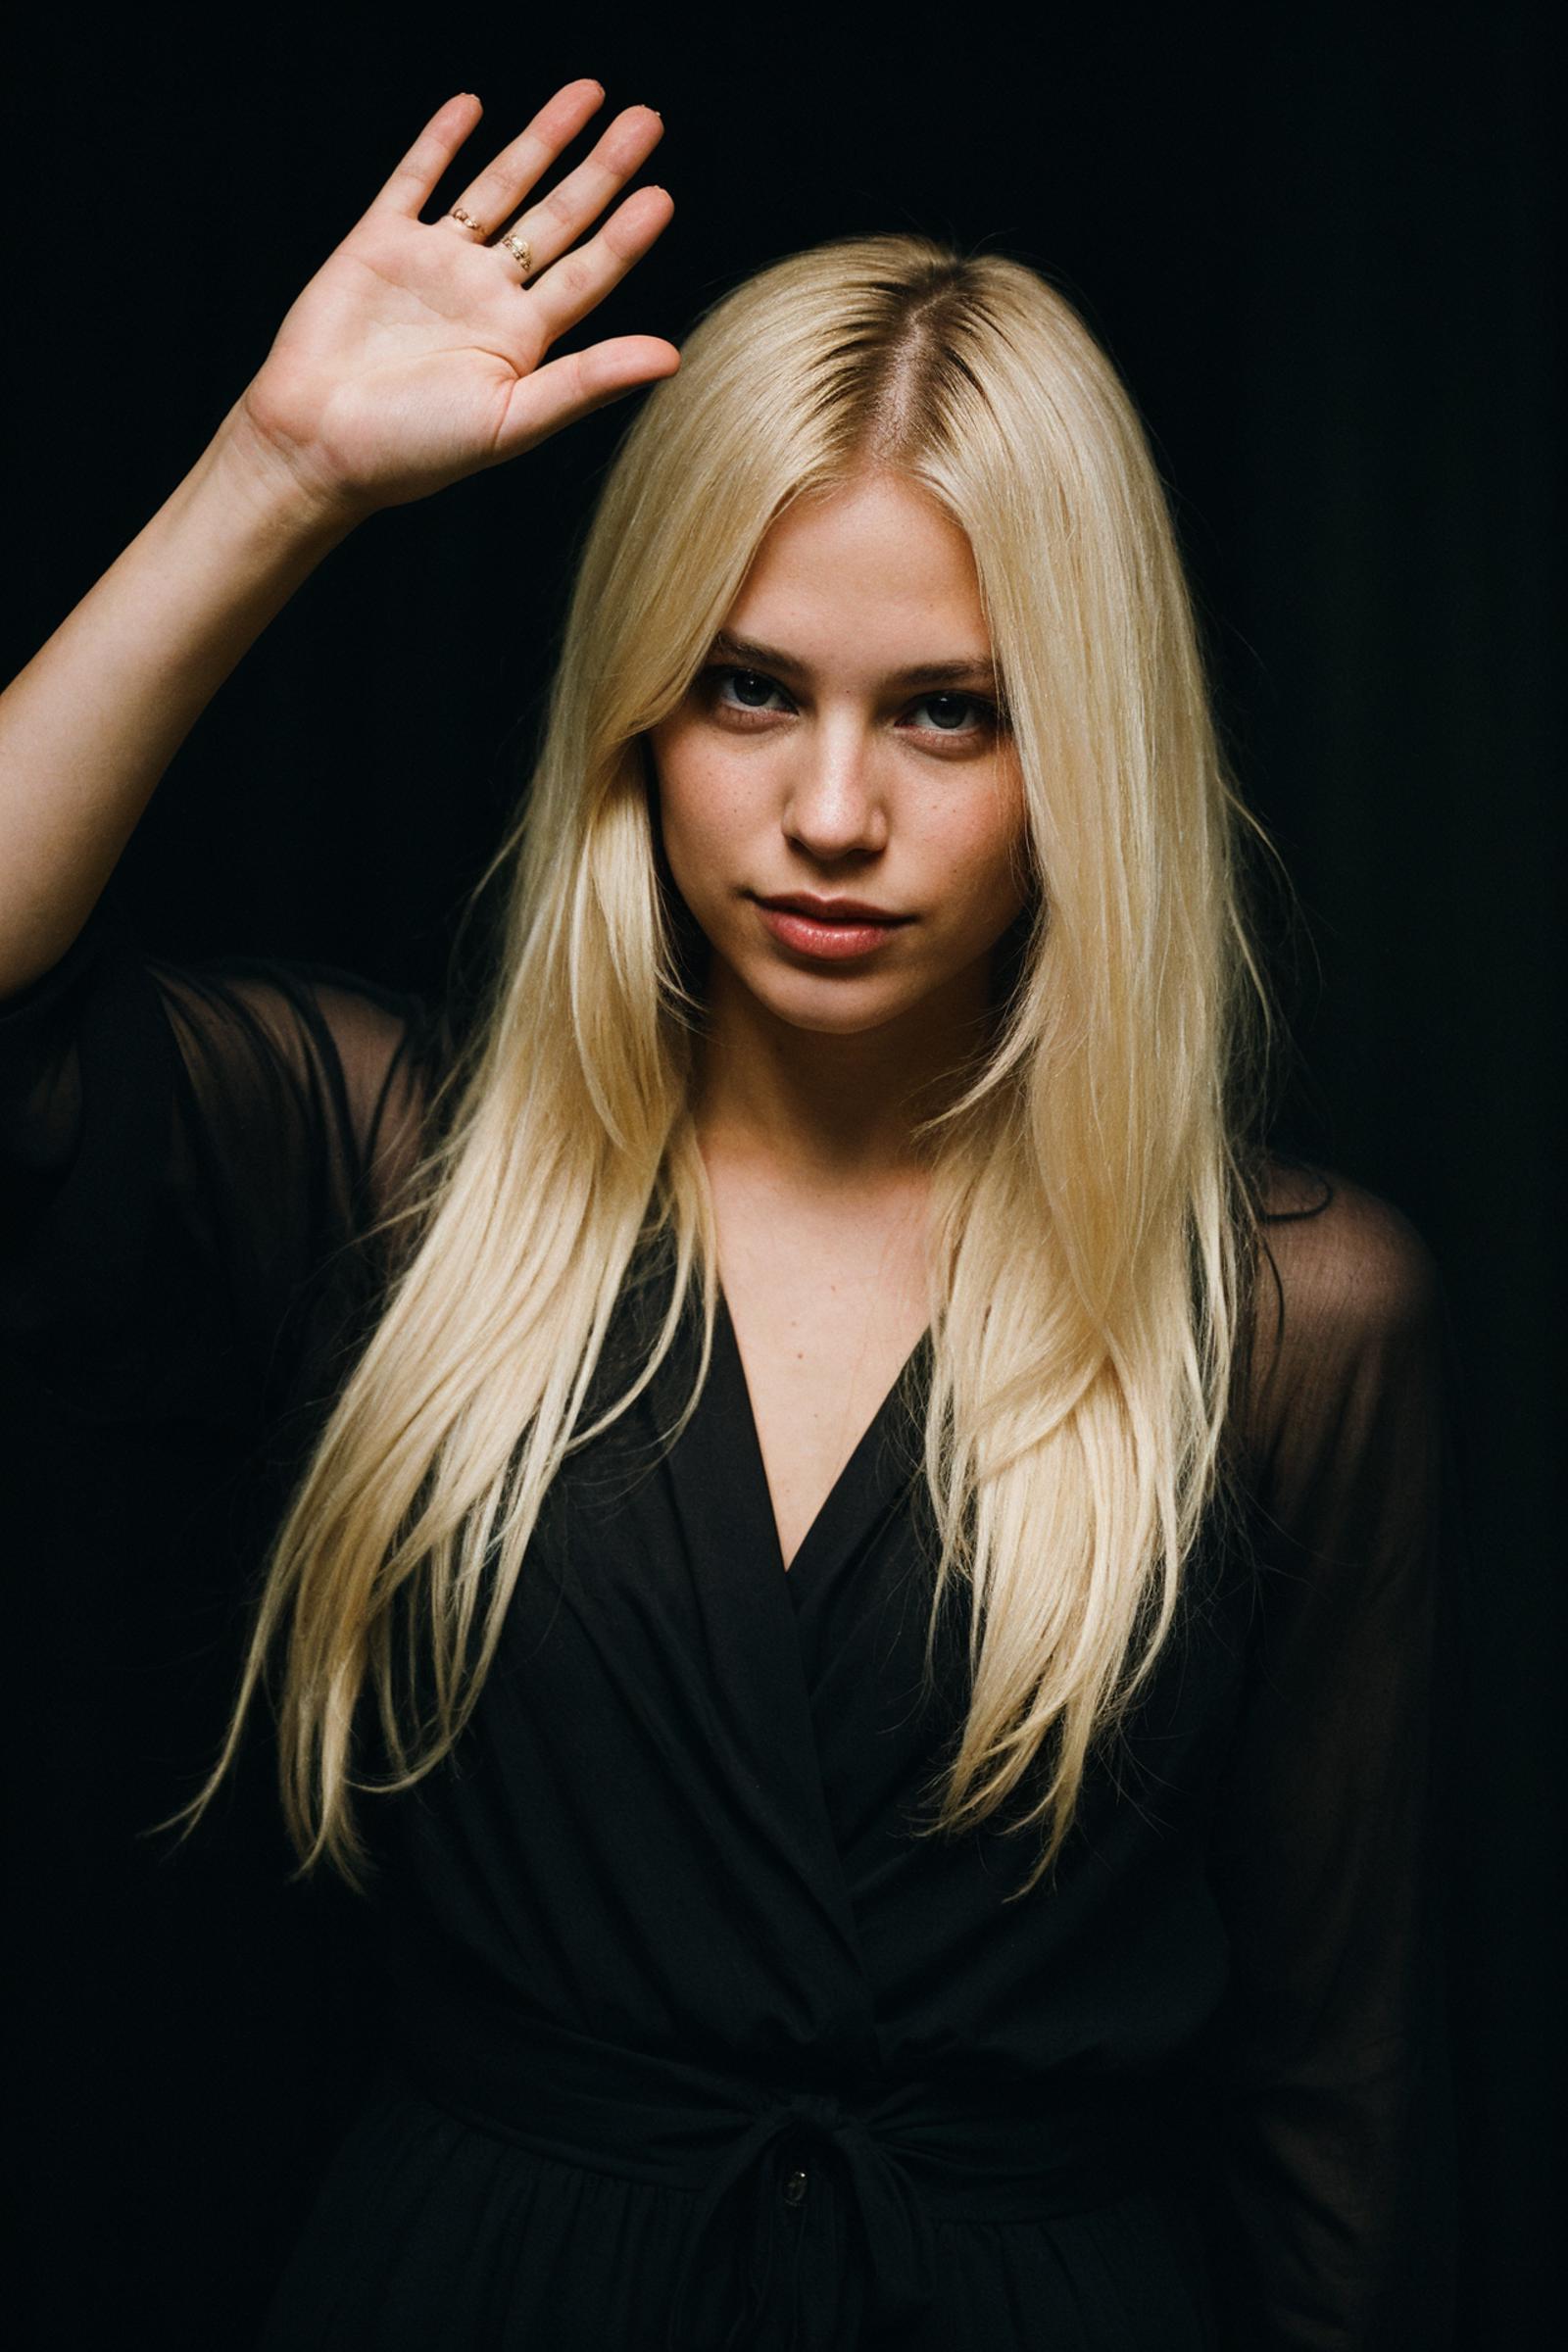 Blonde Woman with Long Hair and a Black Shirt.